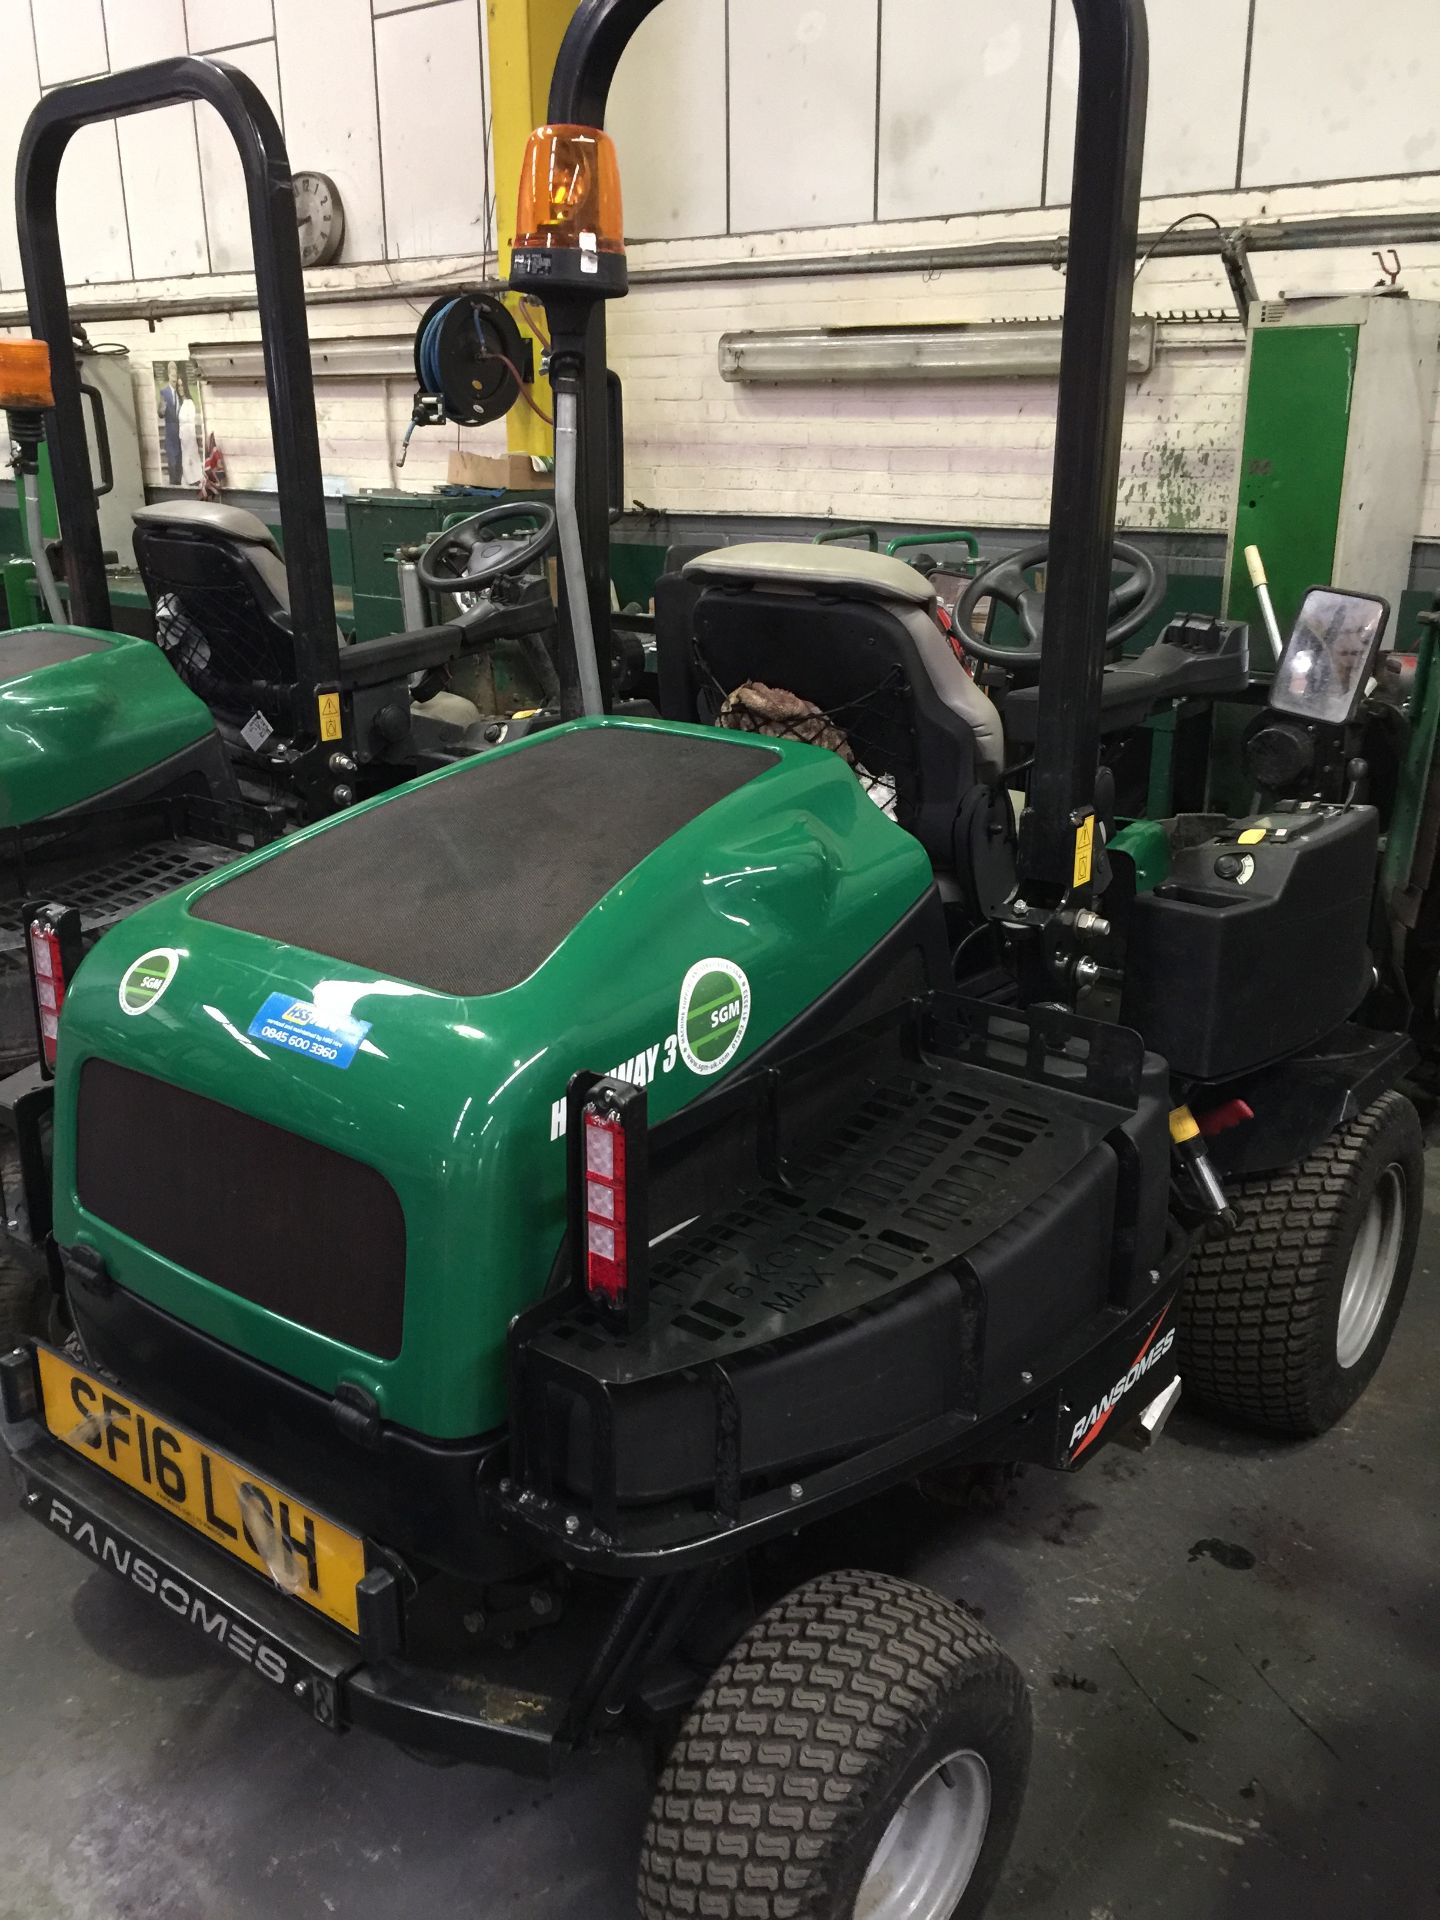 Ransomes Highway 3 LGEA340 4WD Ride on Mower - Image 4 of 7